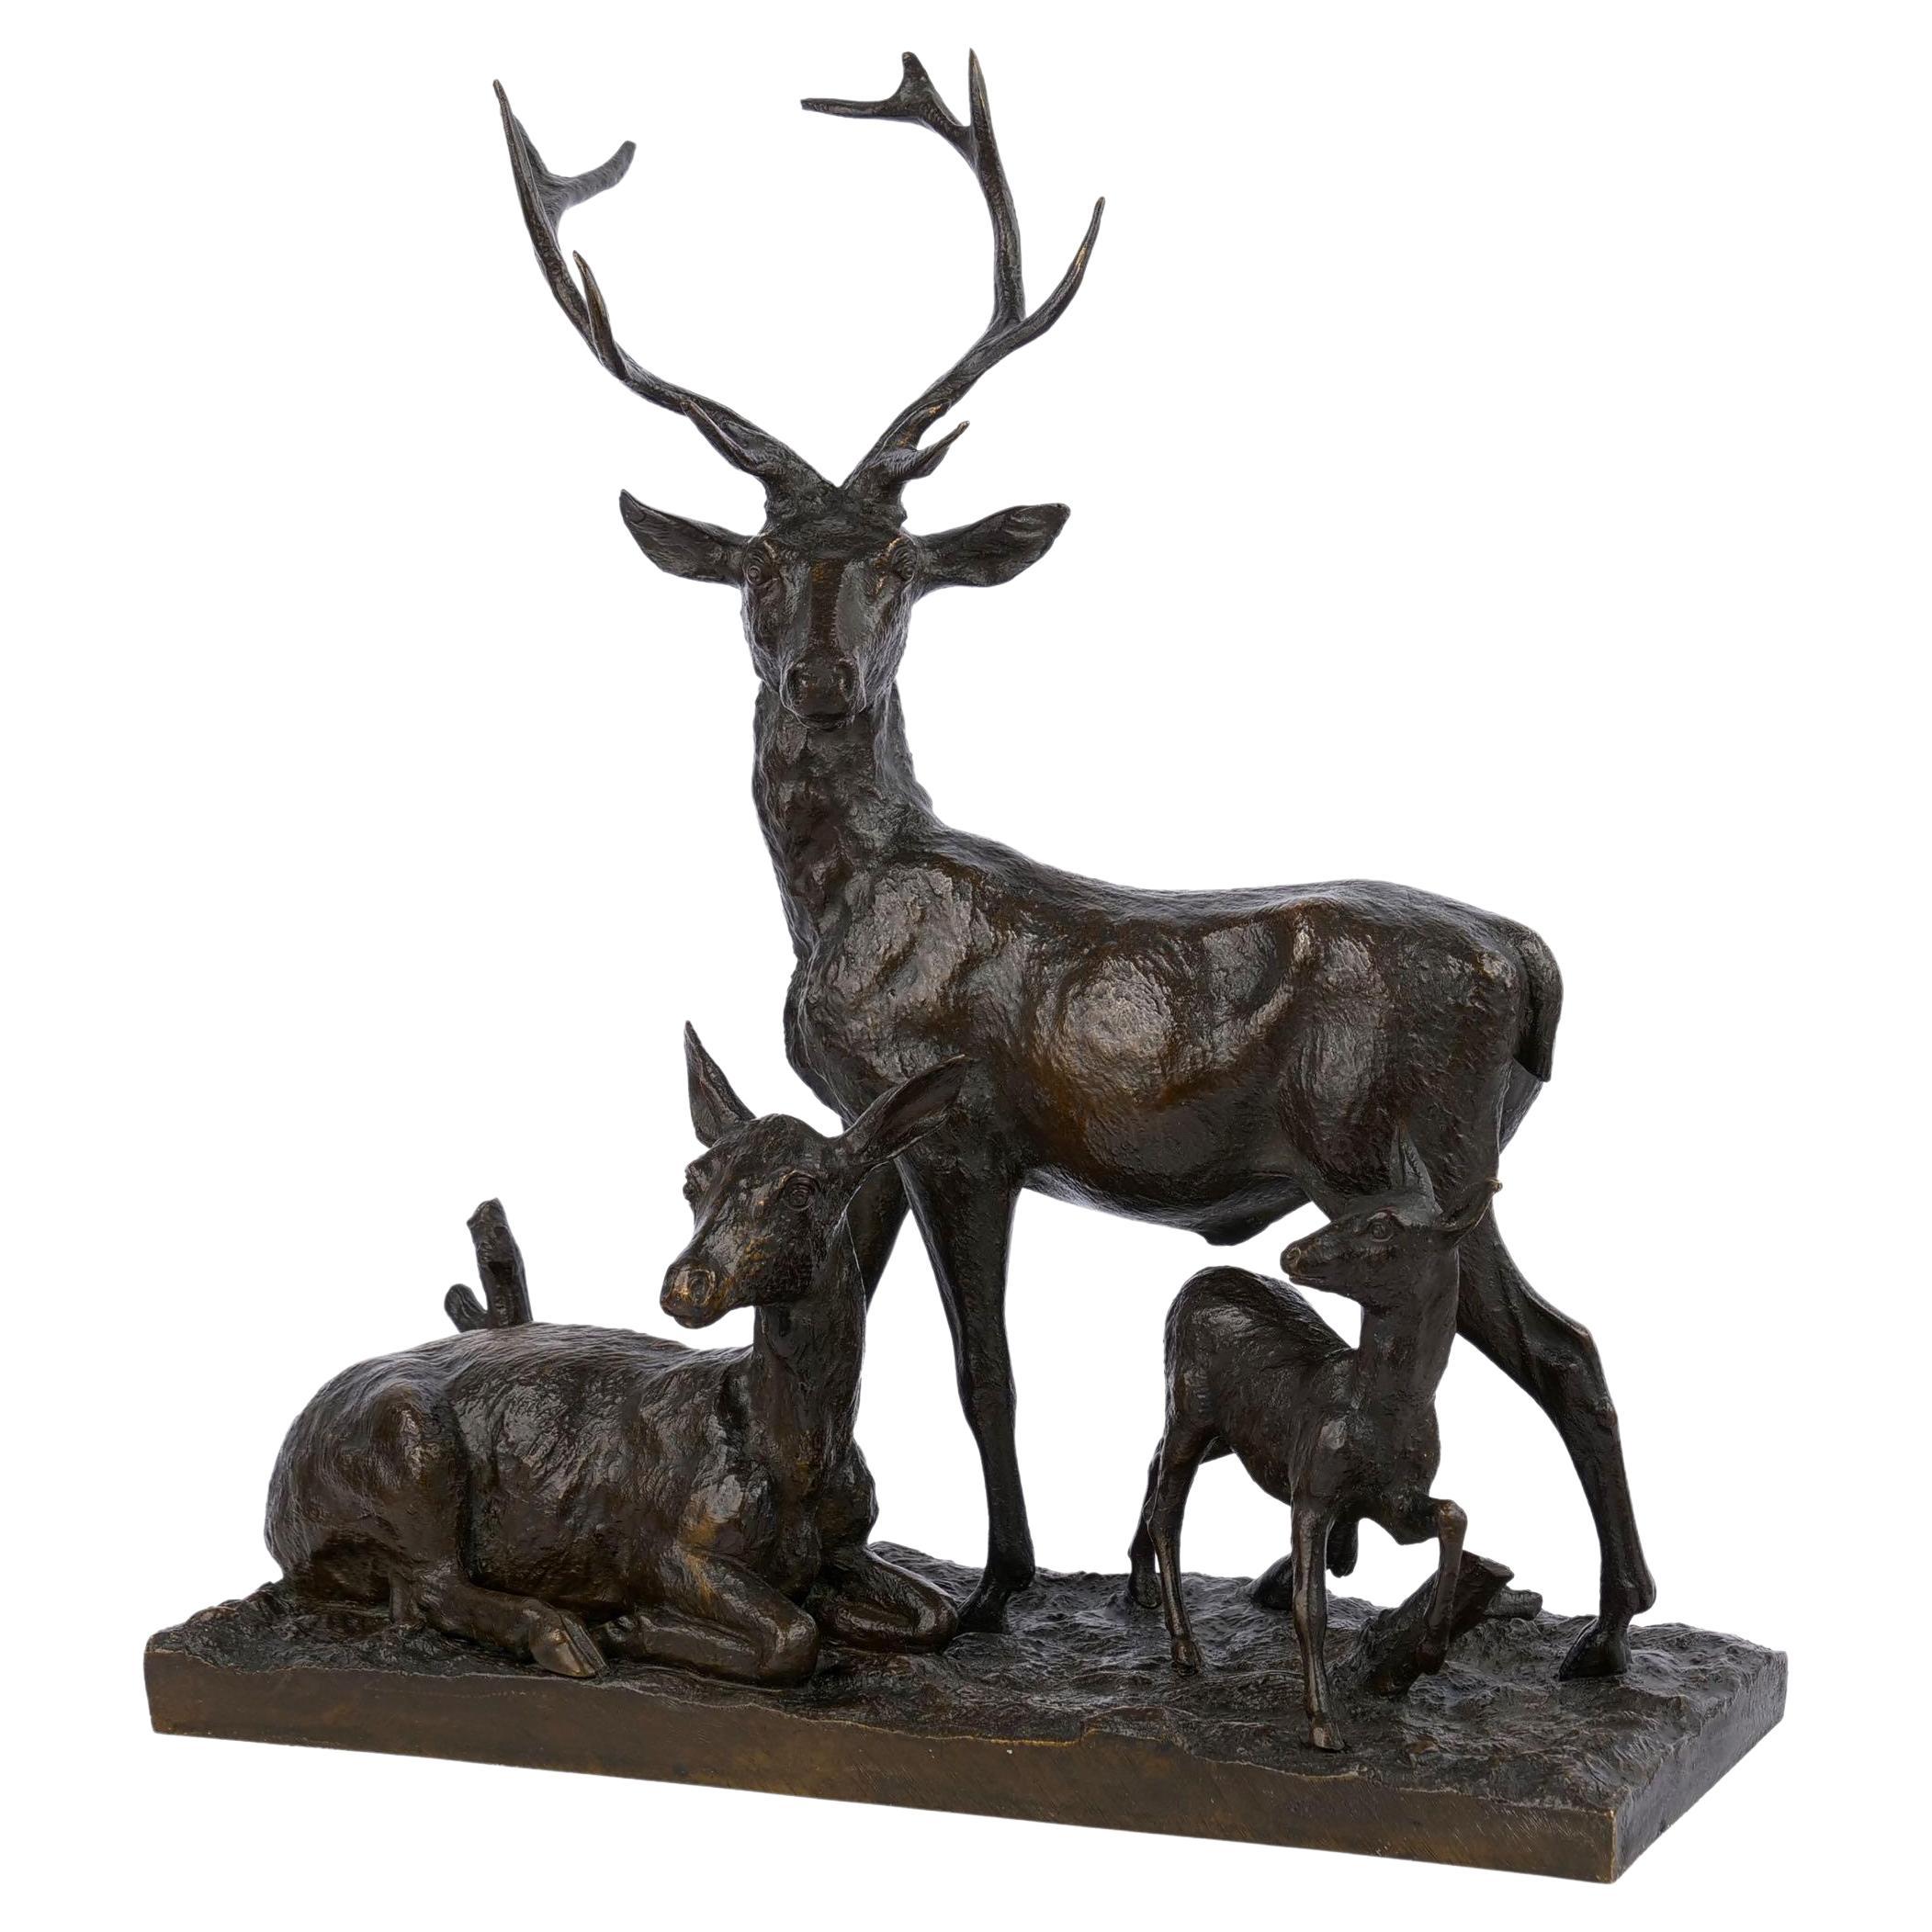 Bronze Sculpture Group “Family of Deer” by Christophe Fratin & Debraux Foundry